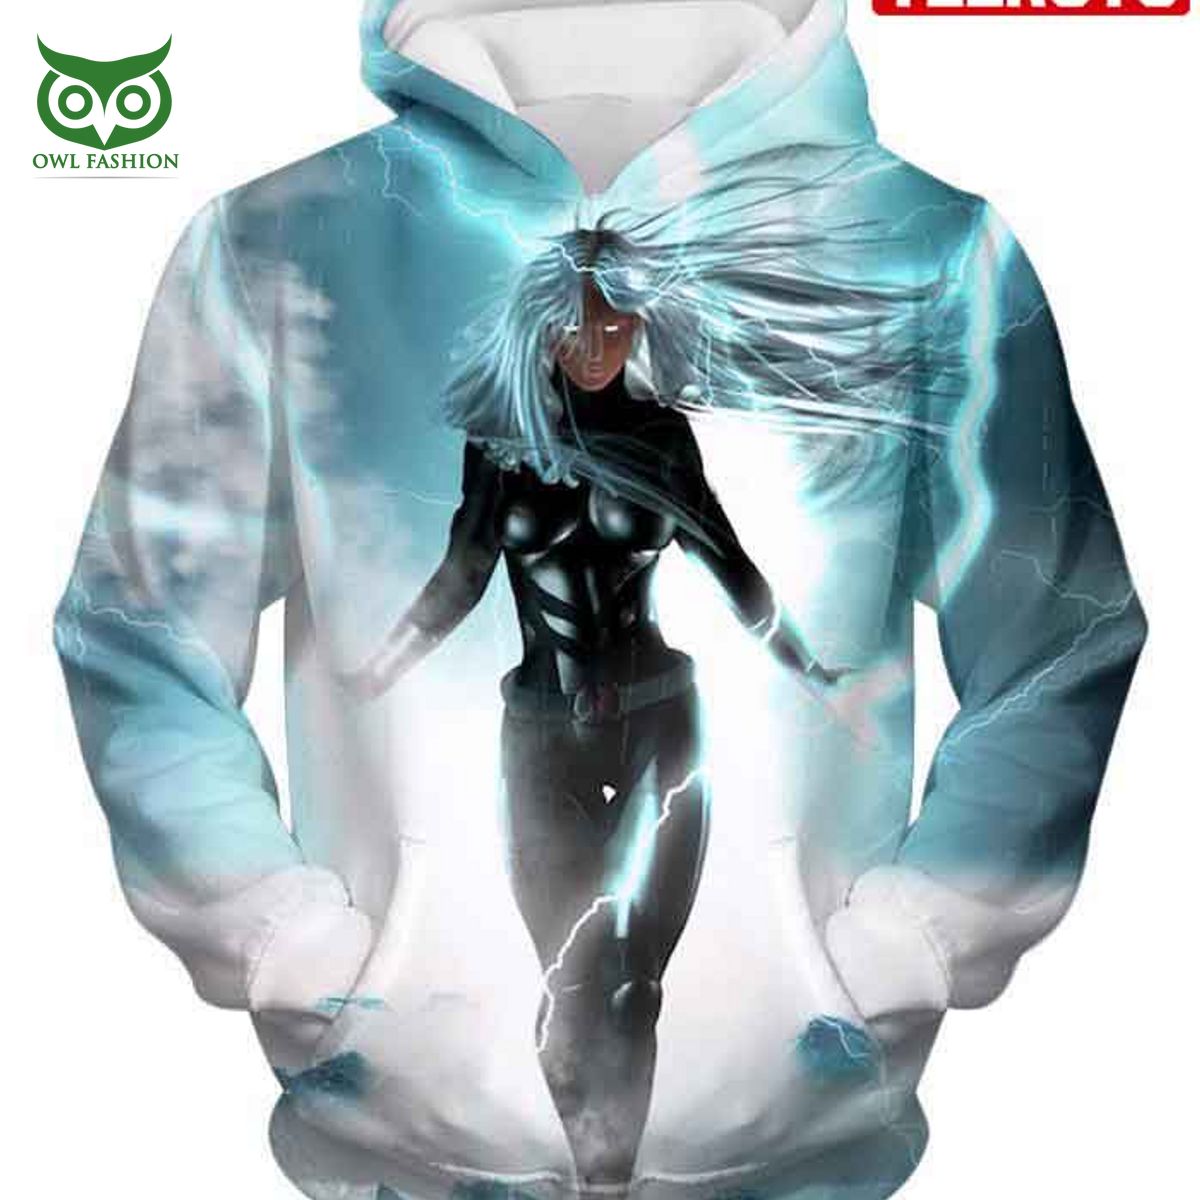 hot white haired animated storm white superhero hd 3d aop hoodie 1 VxNFI